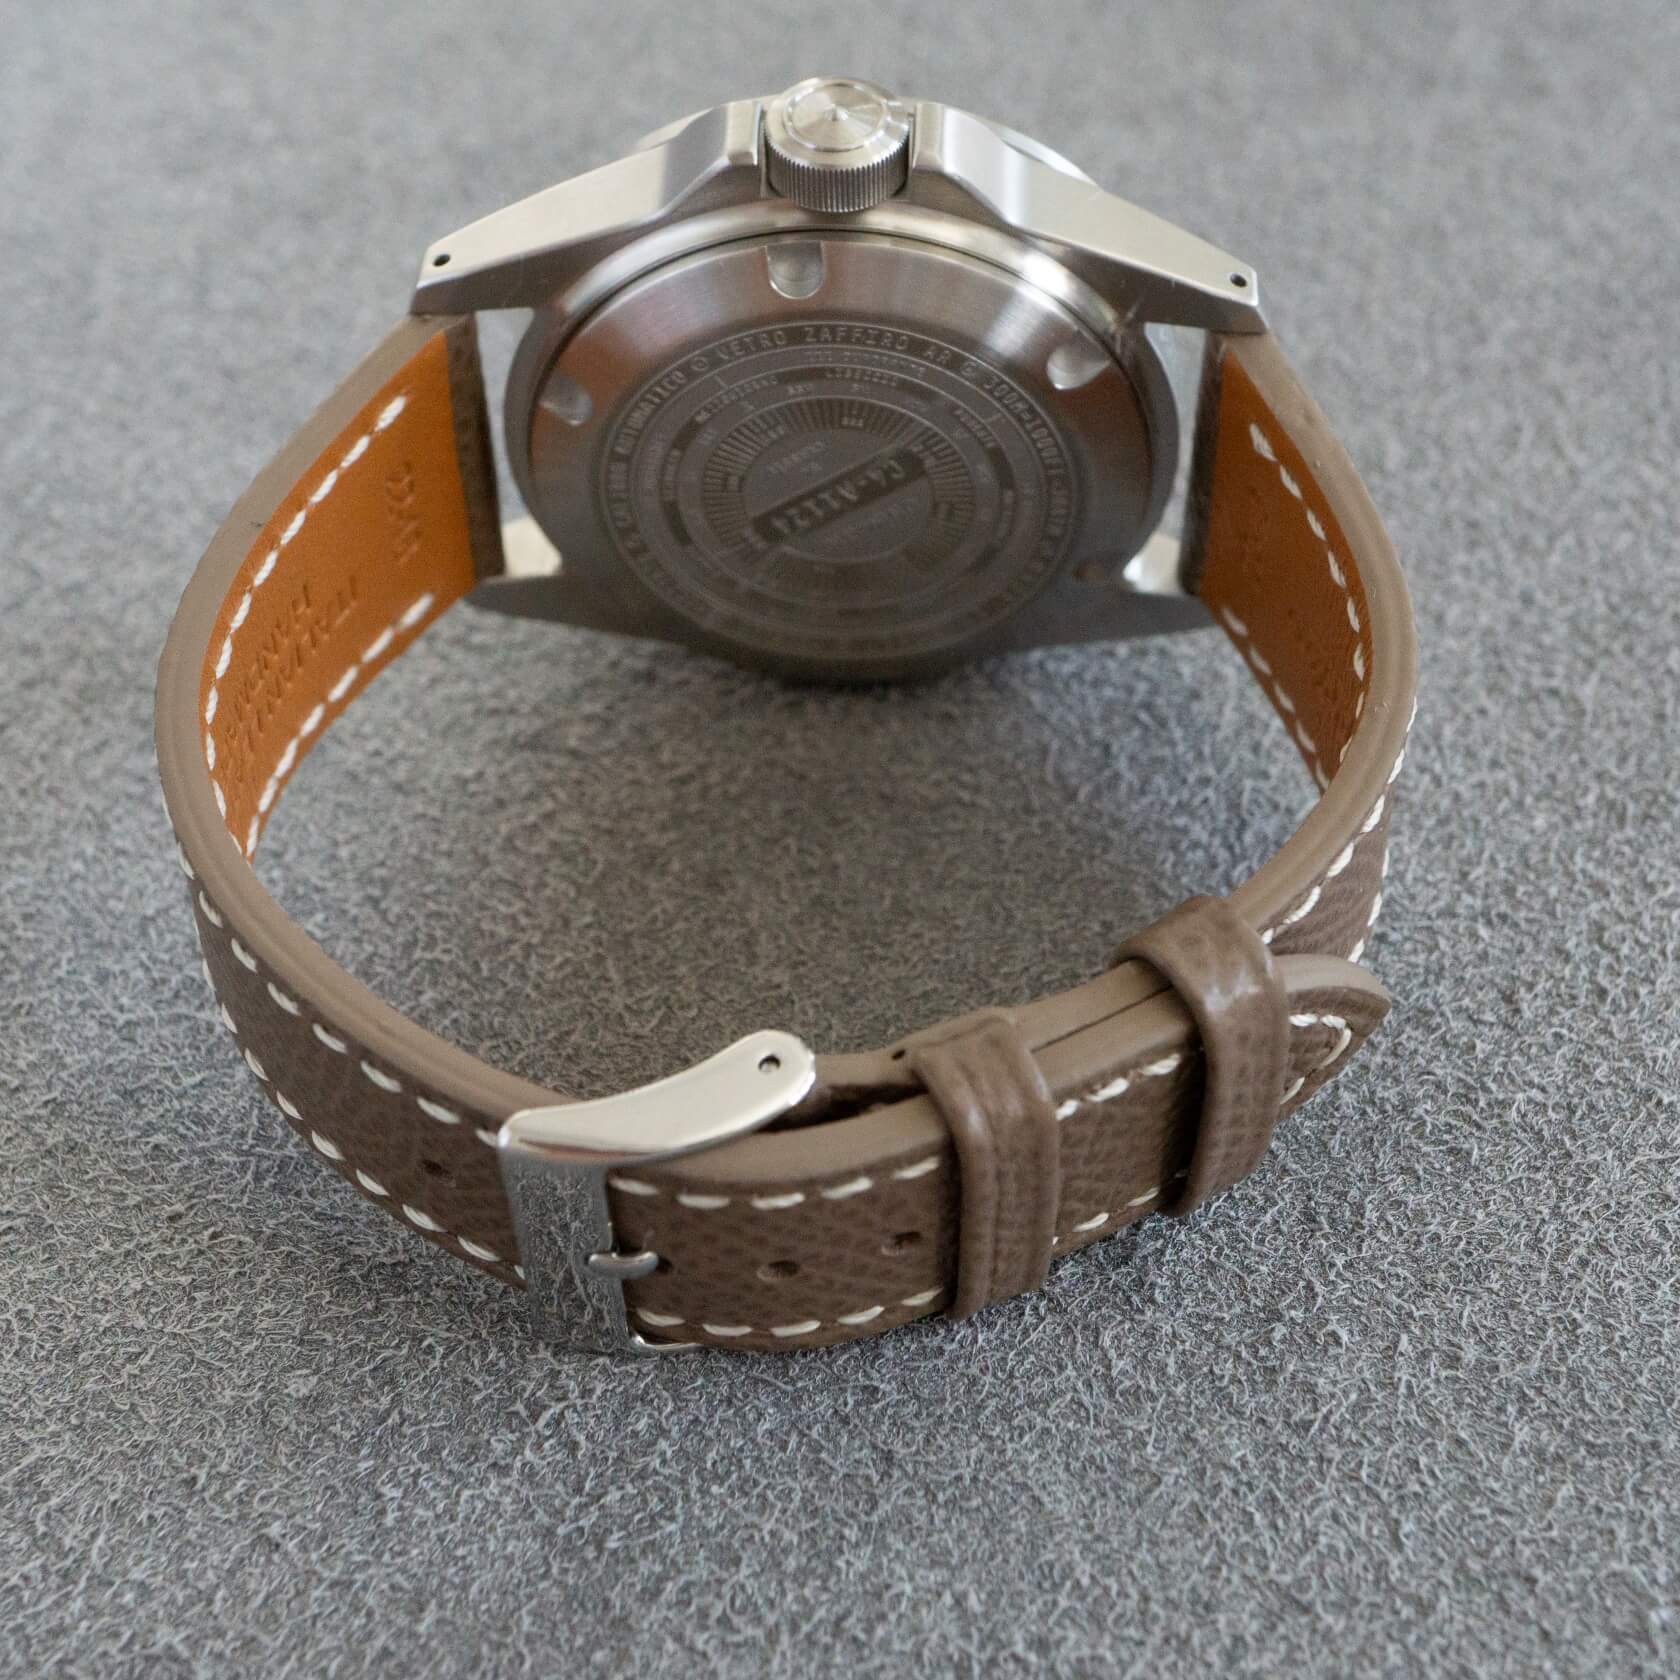 Sestriere Leather Watch Strap on a watch